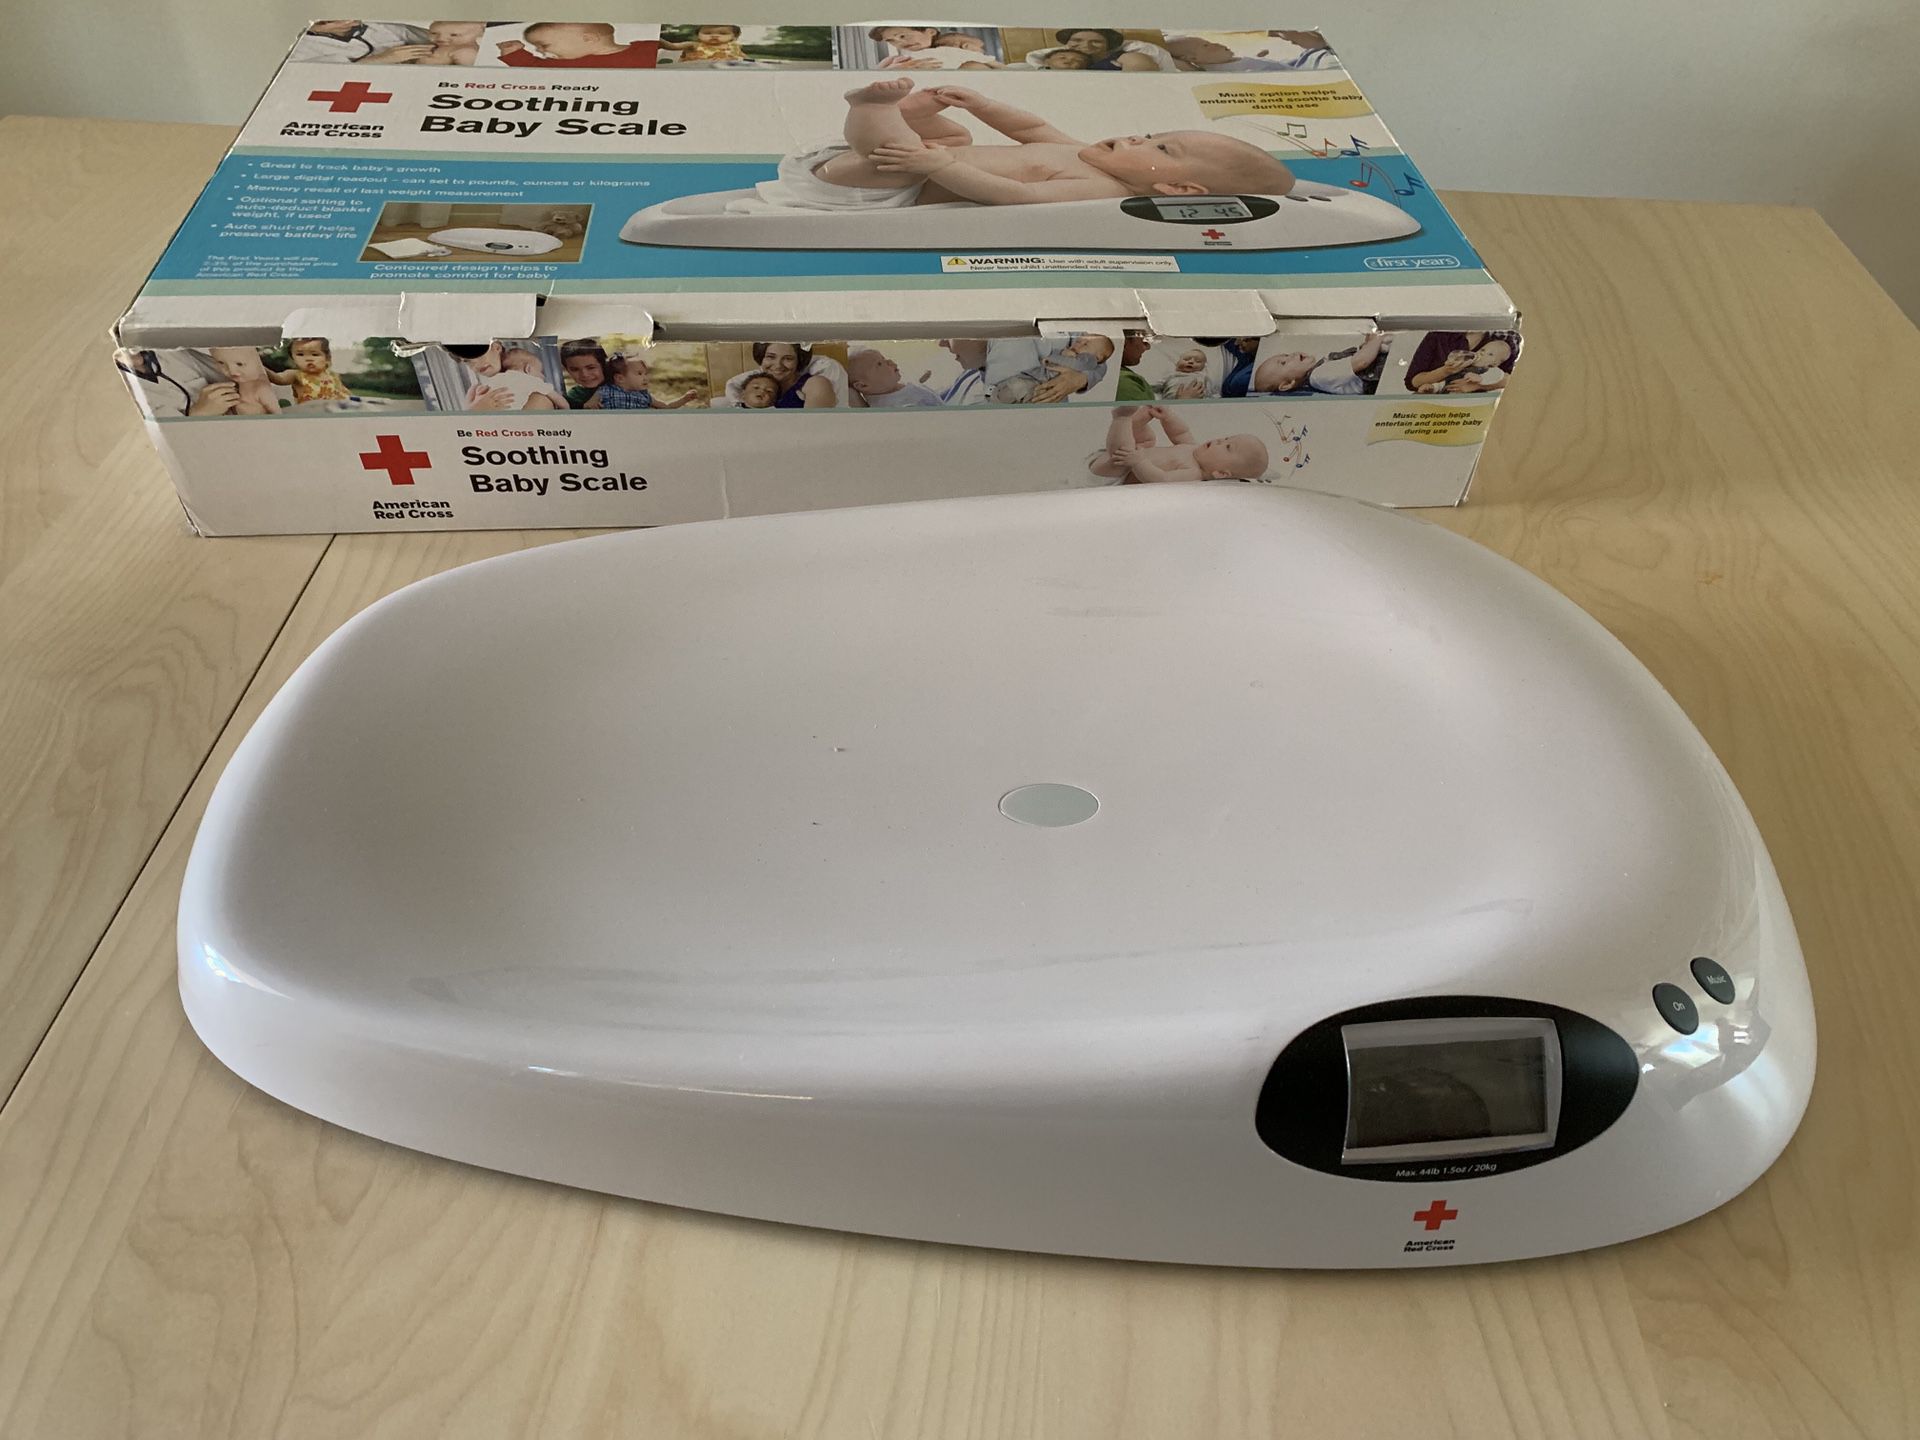 Baby scale (Red Cross)